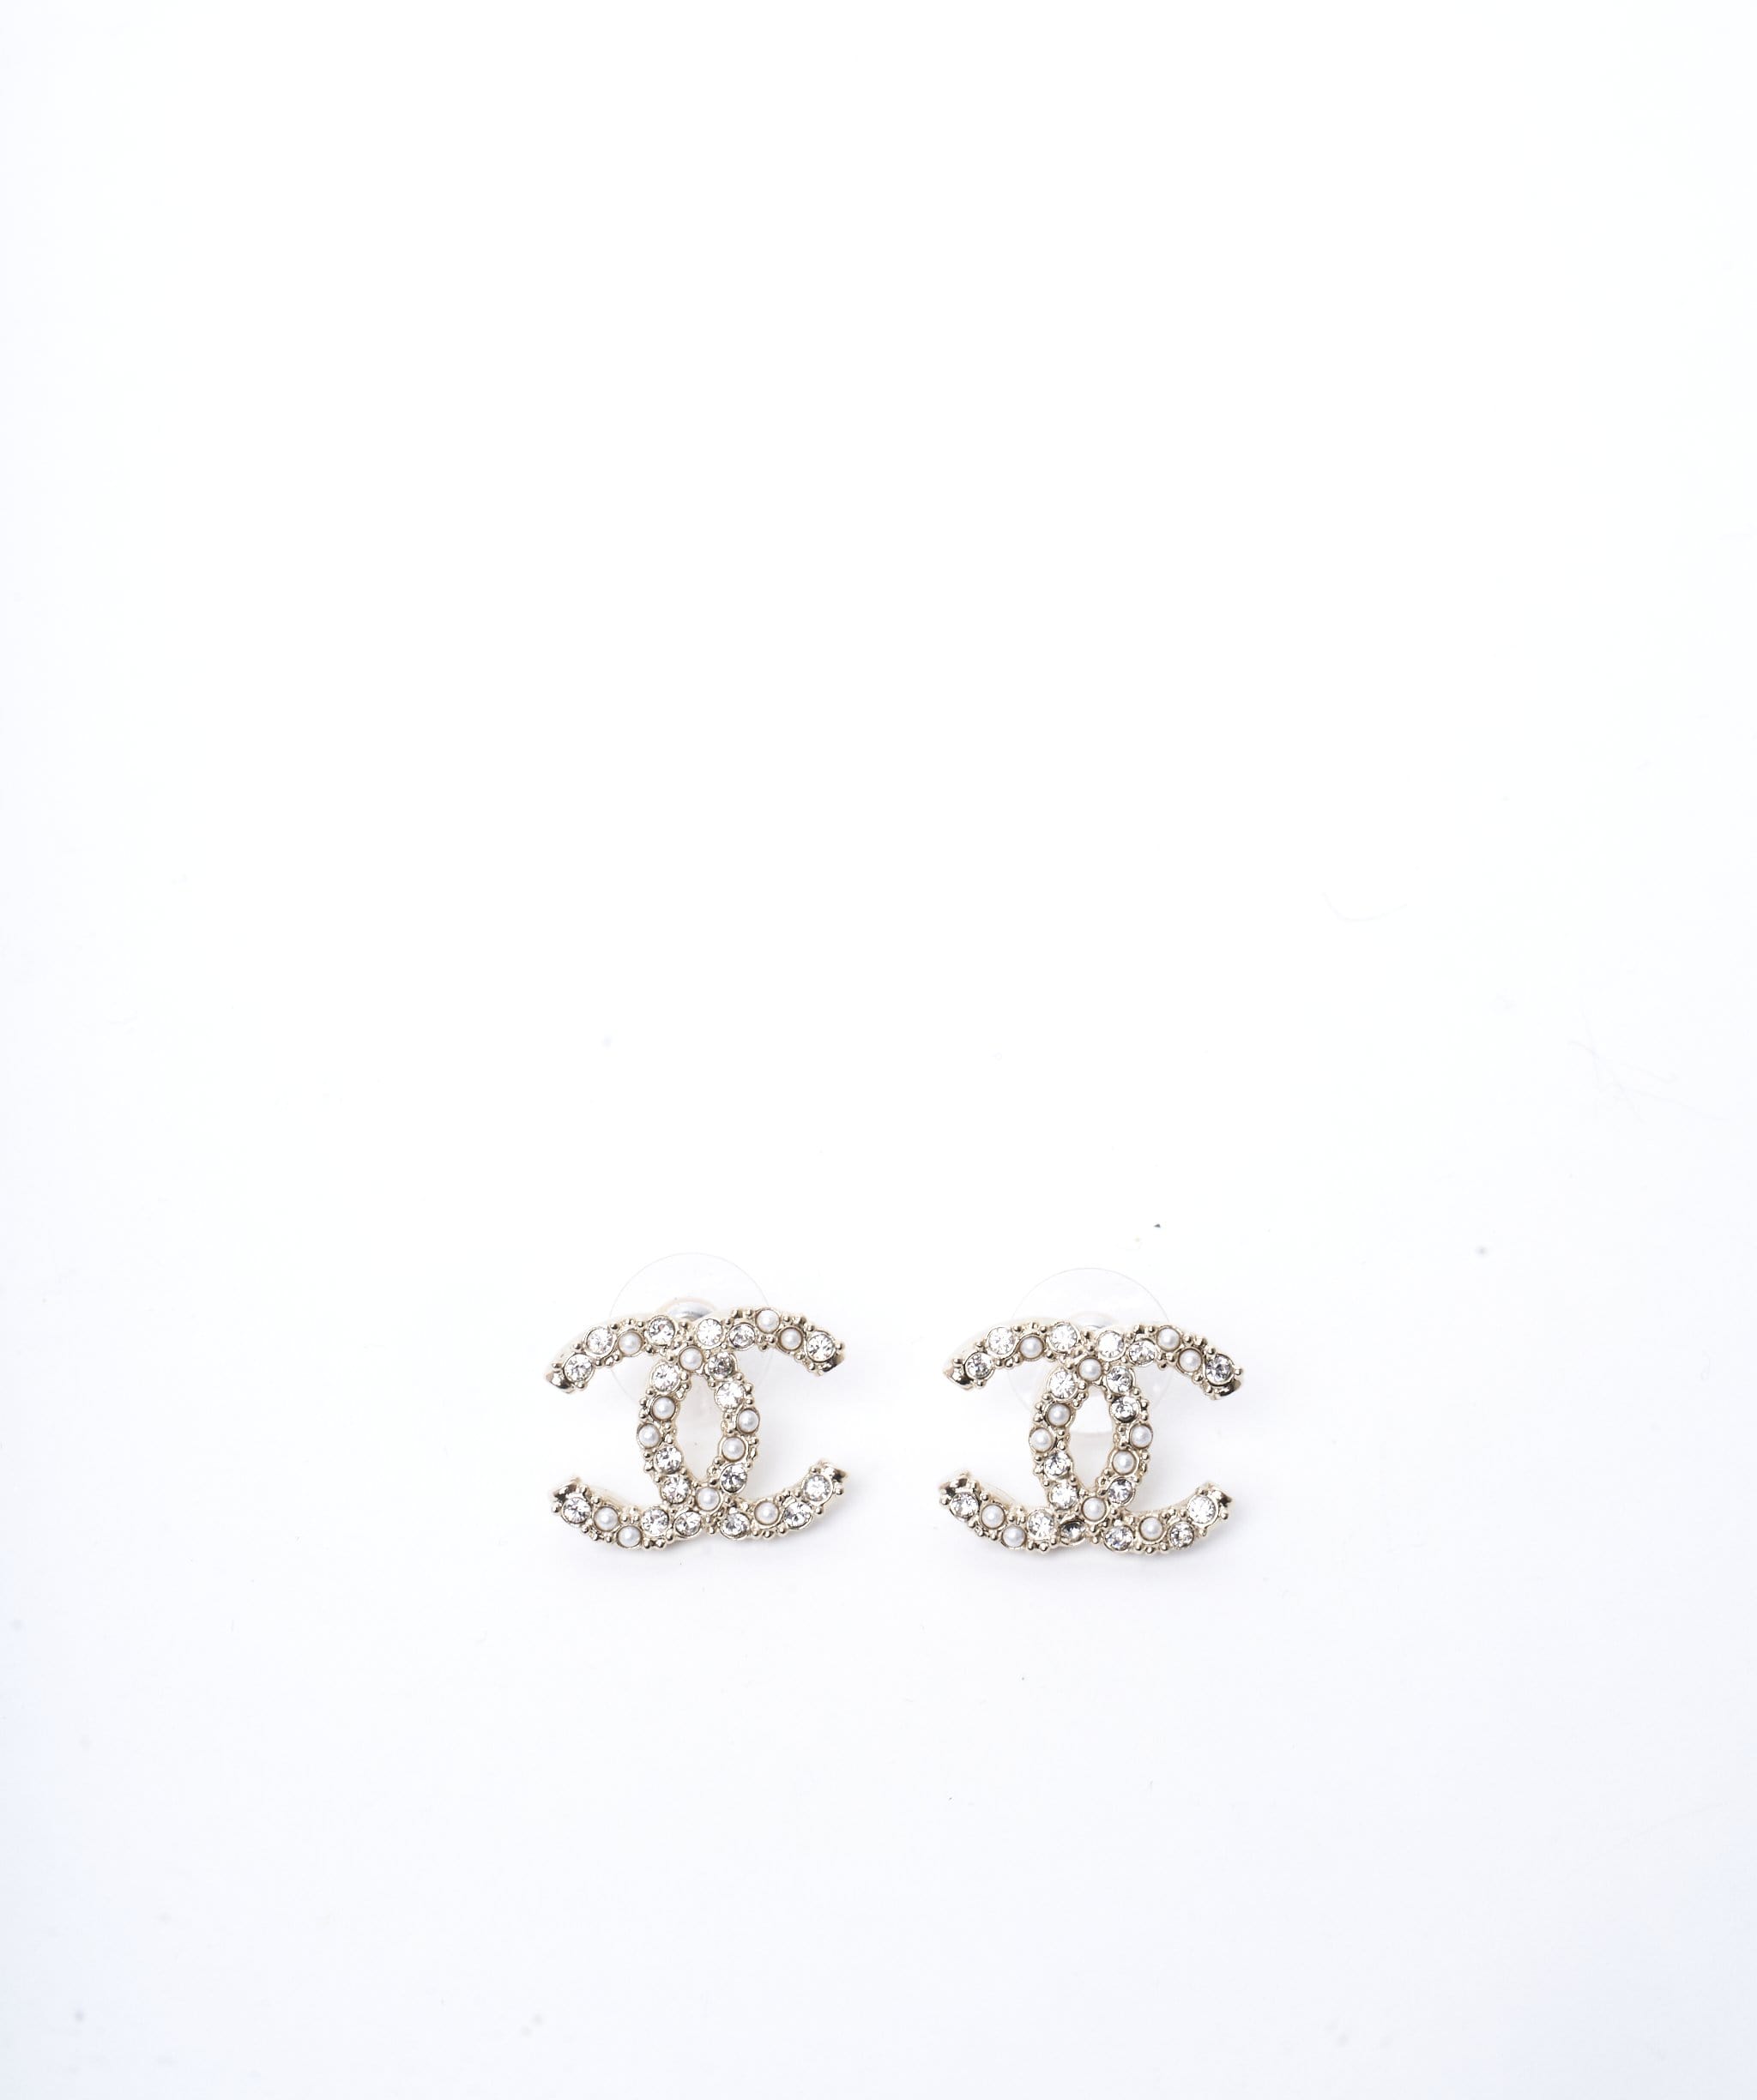 Chanel Large Chanel CC earrings in yellow gold, pearl and crystal